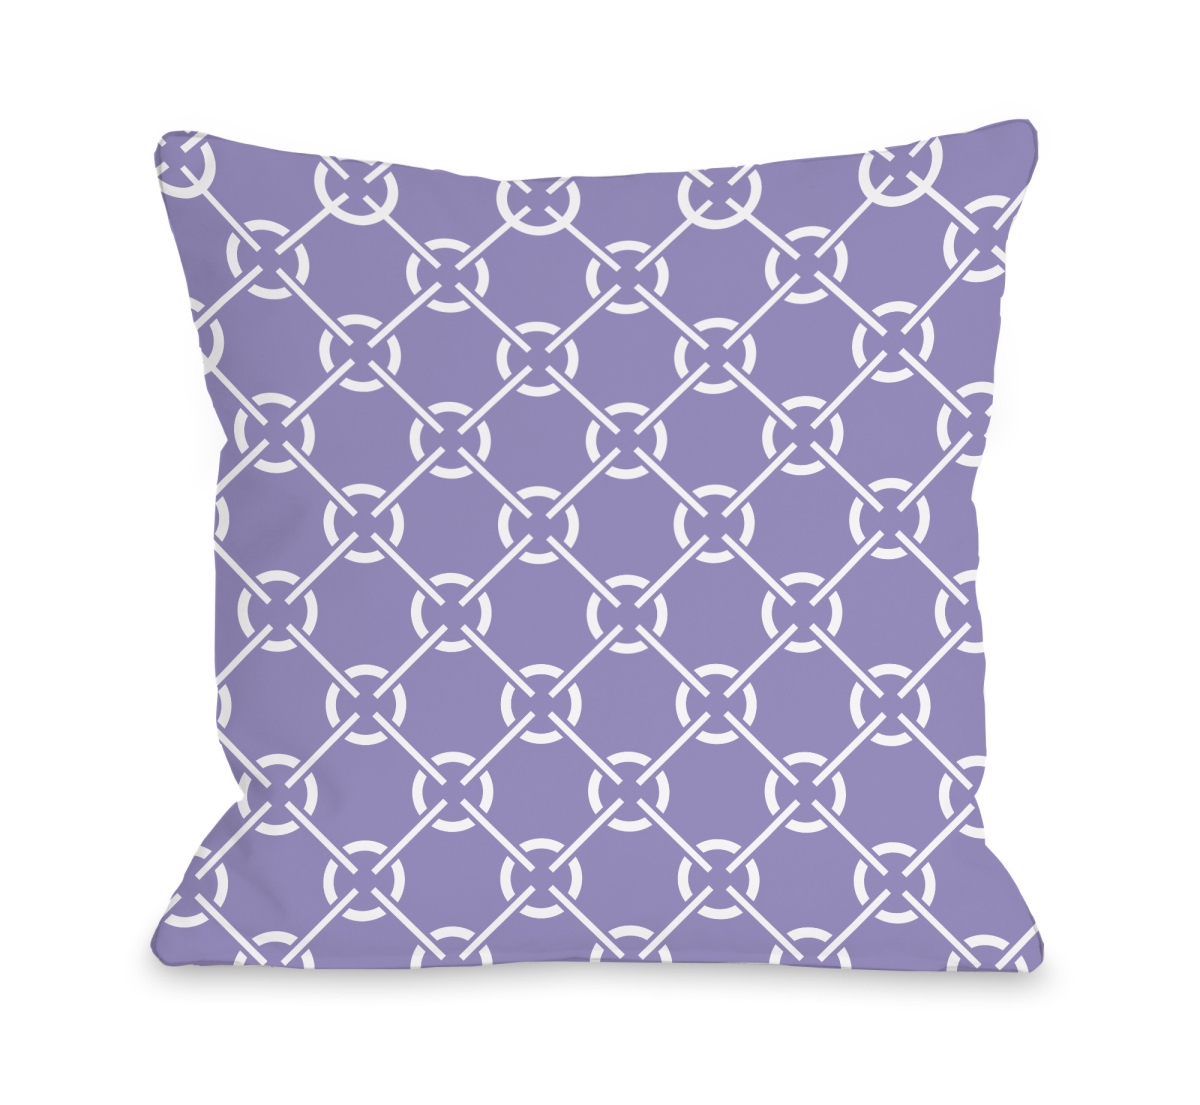 16 X 16 In. Ceciles Circles Pillow, Violet & Tulip